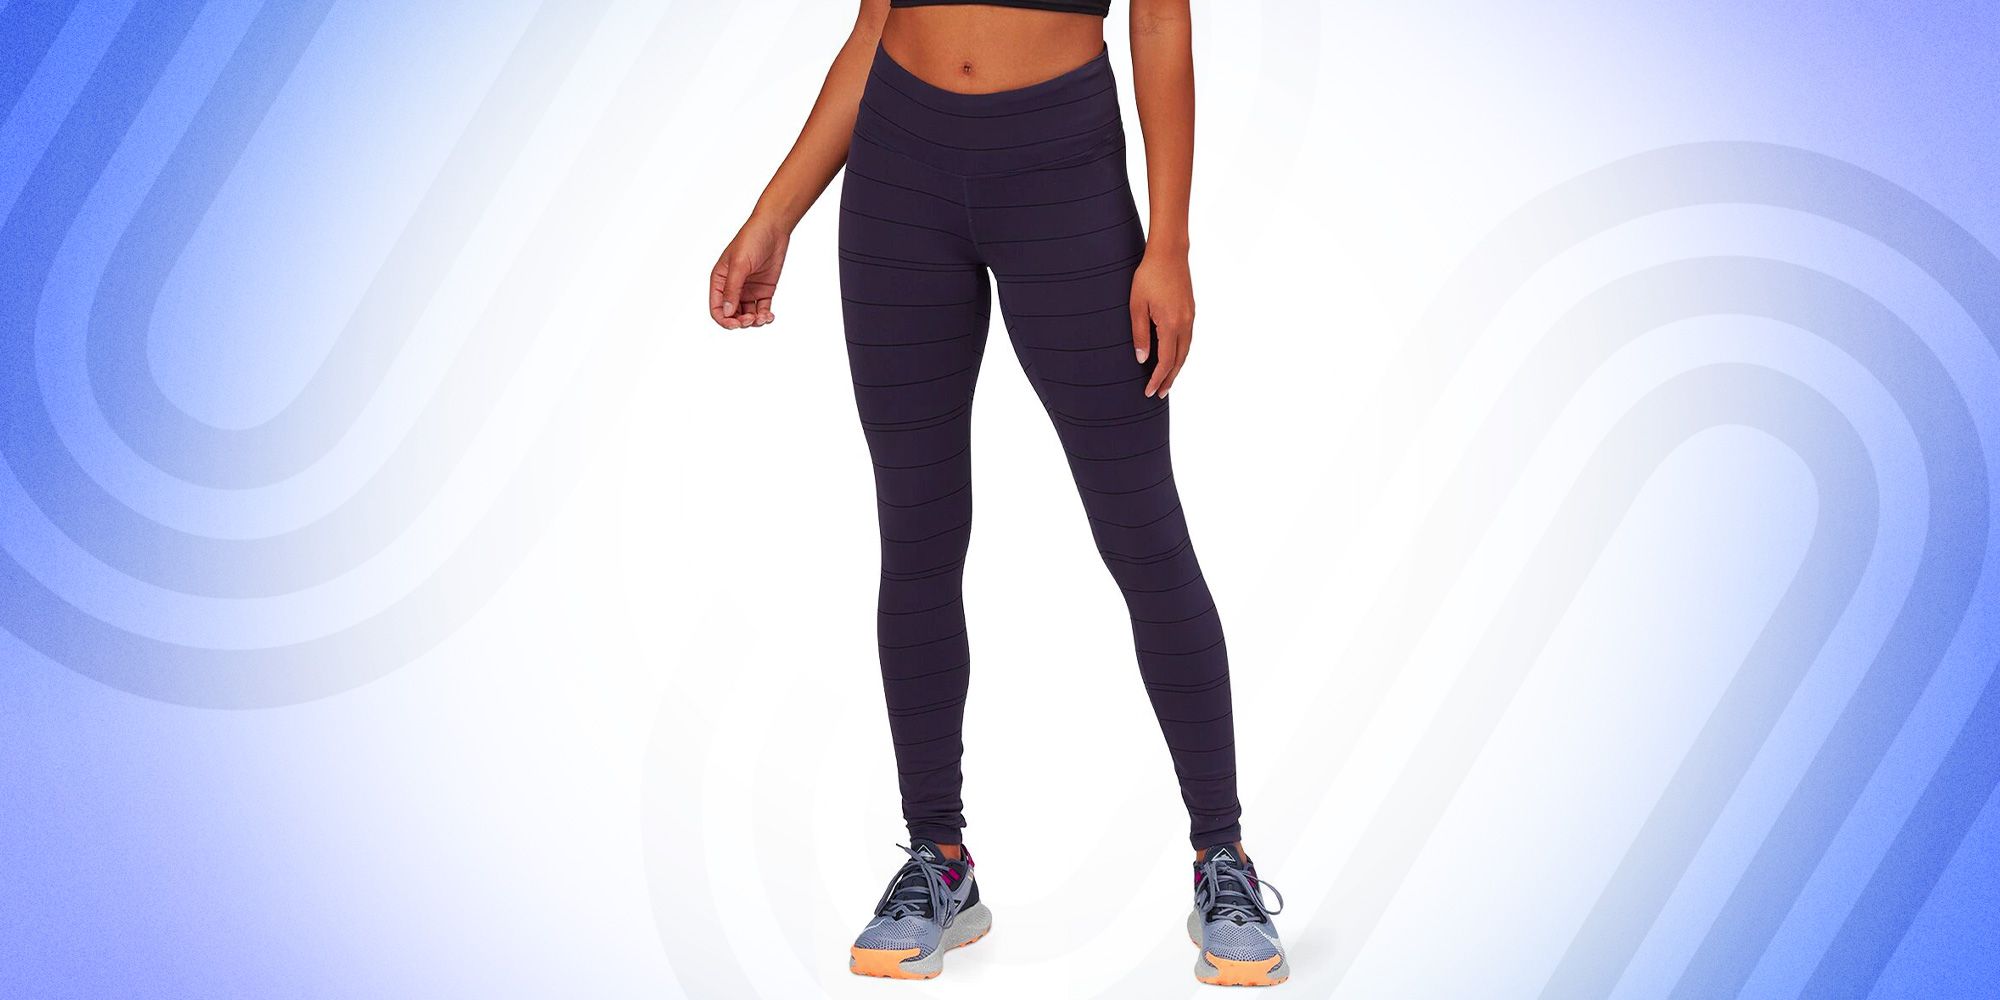 Buy High Waist Flared Yoga Pants in Black with Side Pockets Online India,  Best Prices, COD - Clovia - AB0090A13